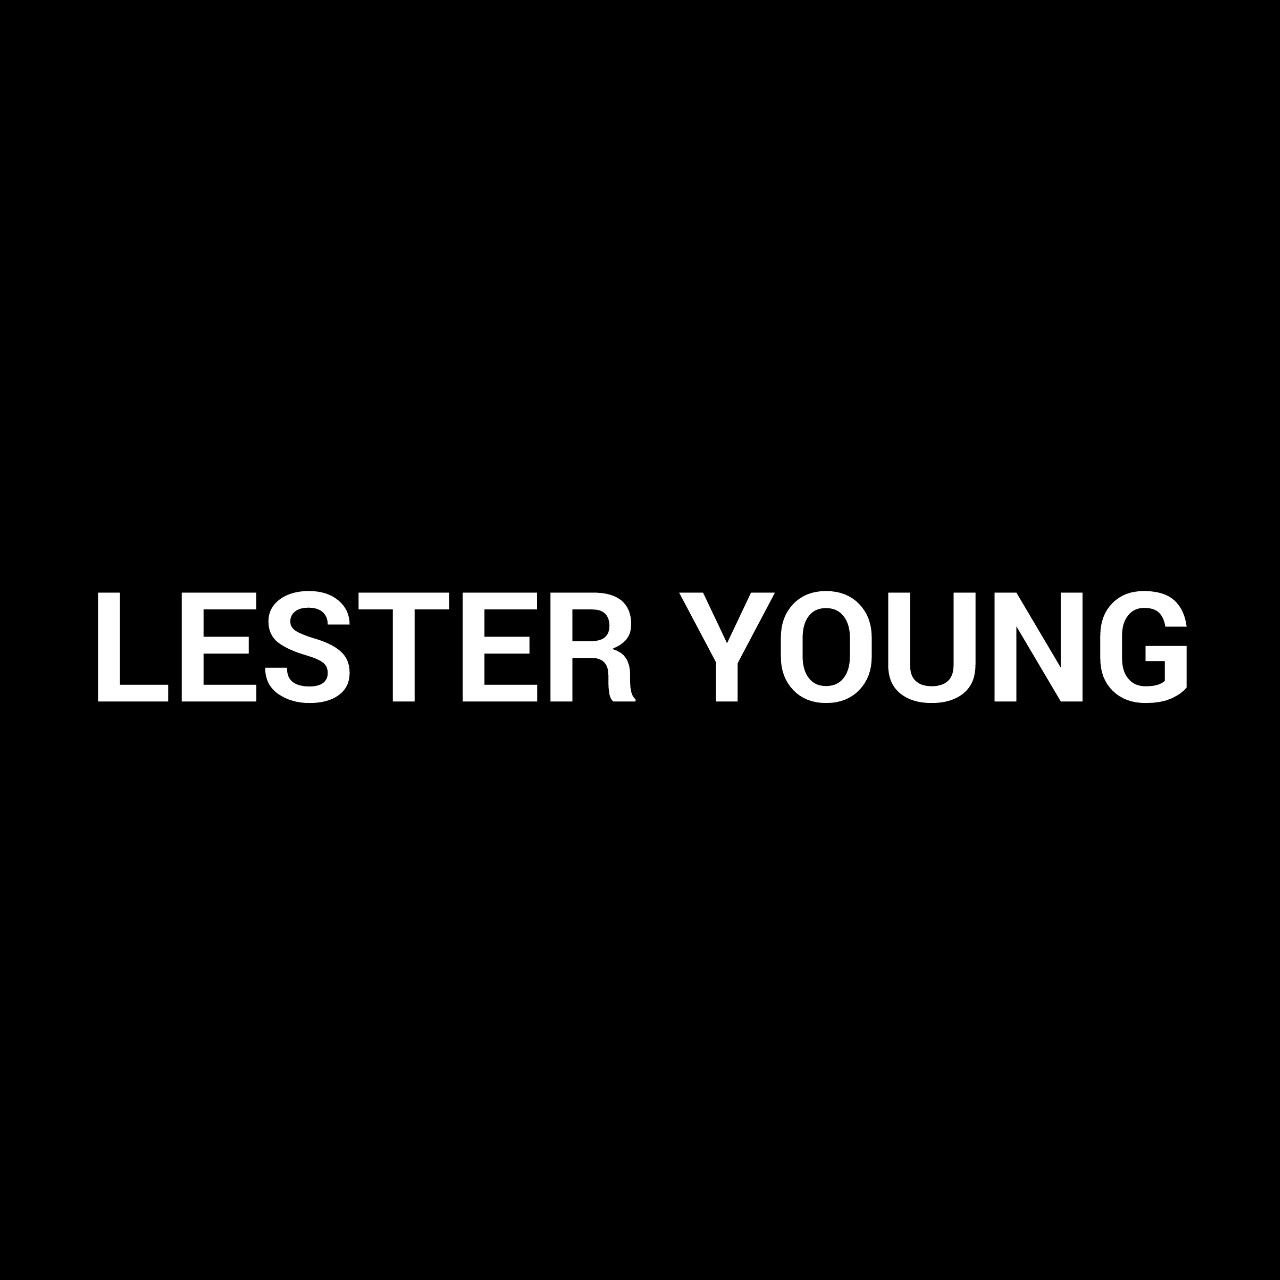 Lester Young logo